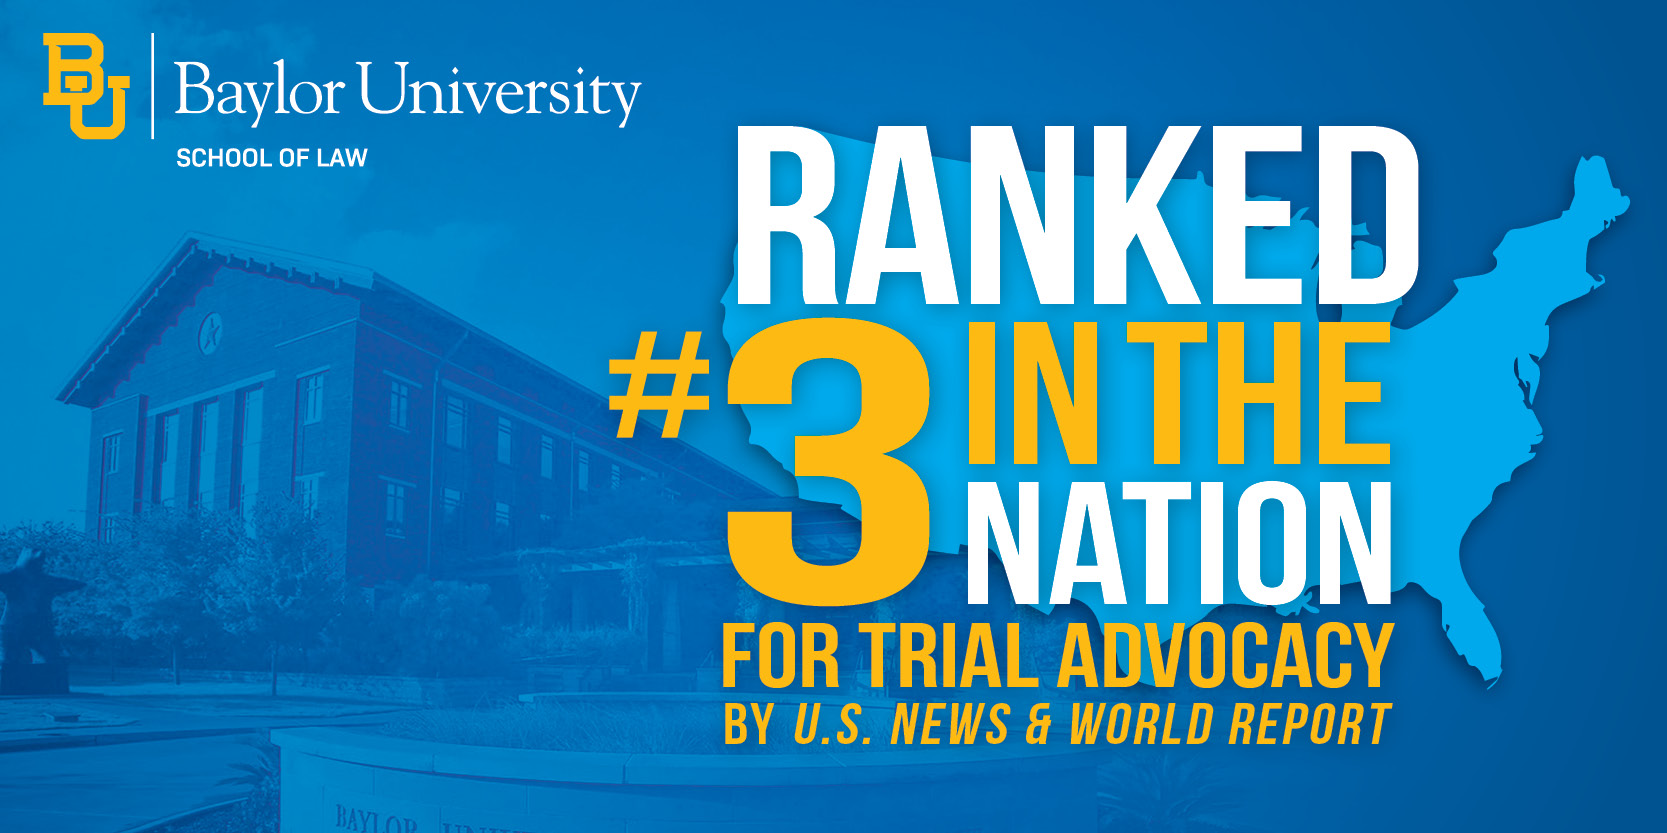 Decorative image stating that Baylor Law is Ranked #3 in the nation for trial advocacy